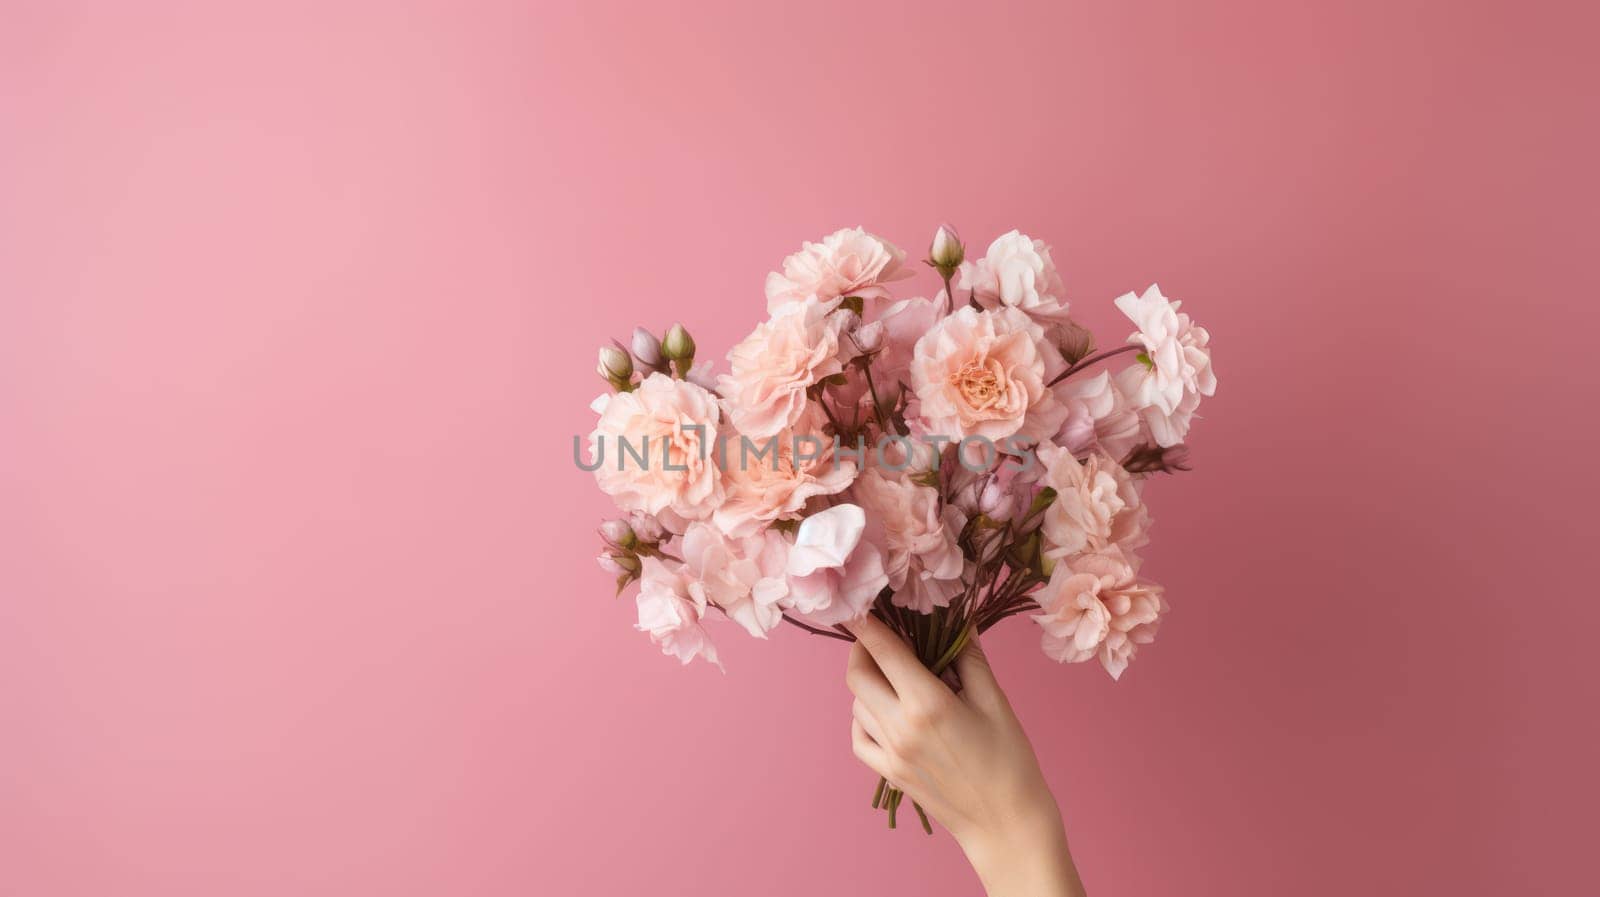 Blossoming Beauty: A Romantic Bouquet of Pink Peonies Held Lovingly by a Woman on a Floral Background